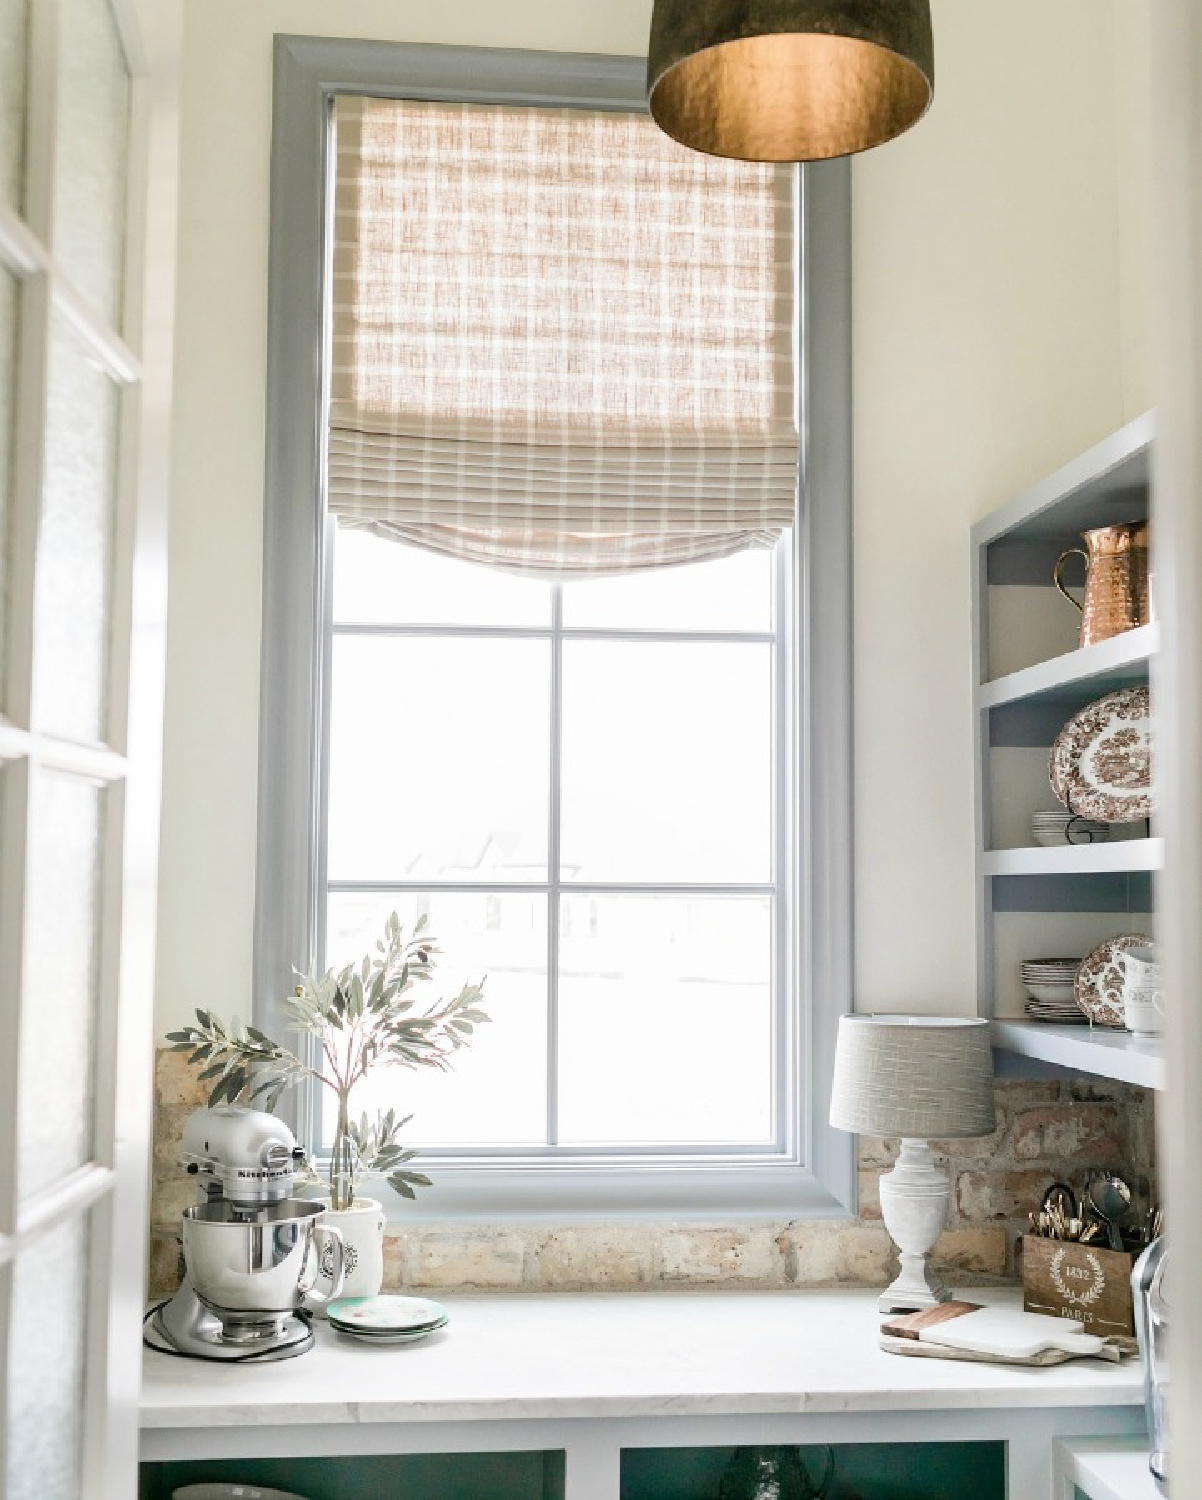 SW Alabaster in a lovely country French pantry with window and built-in shelves - Brit Jones Design.